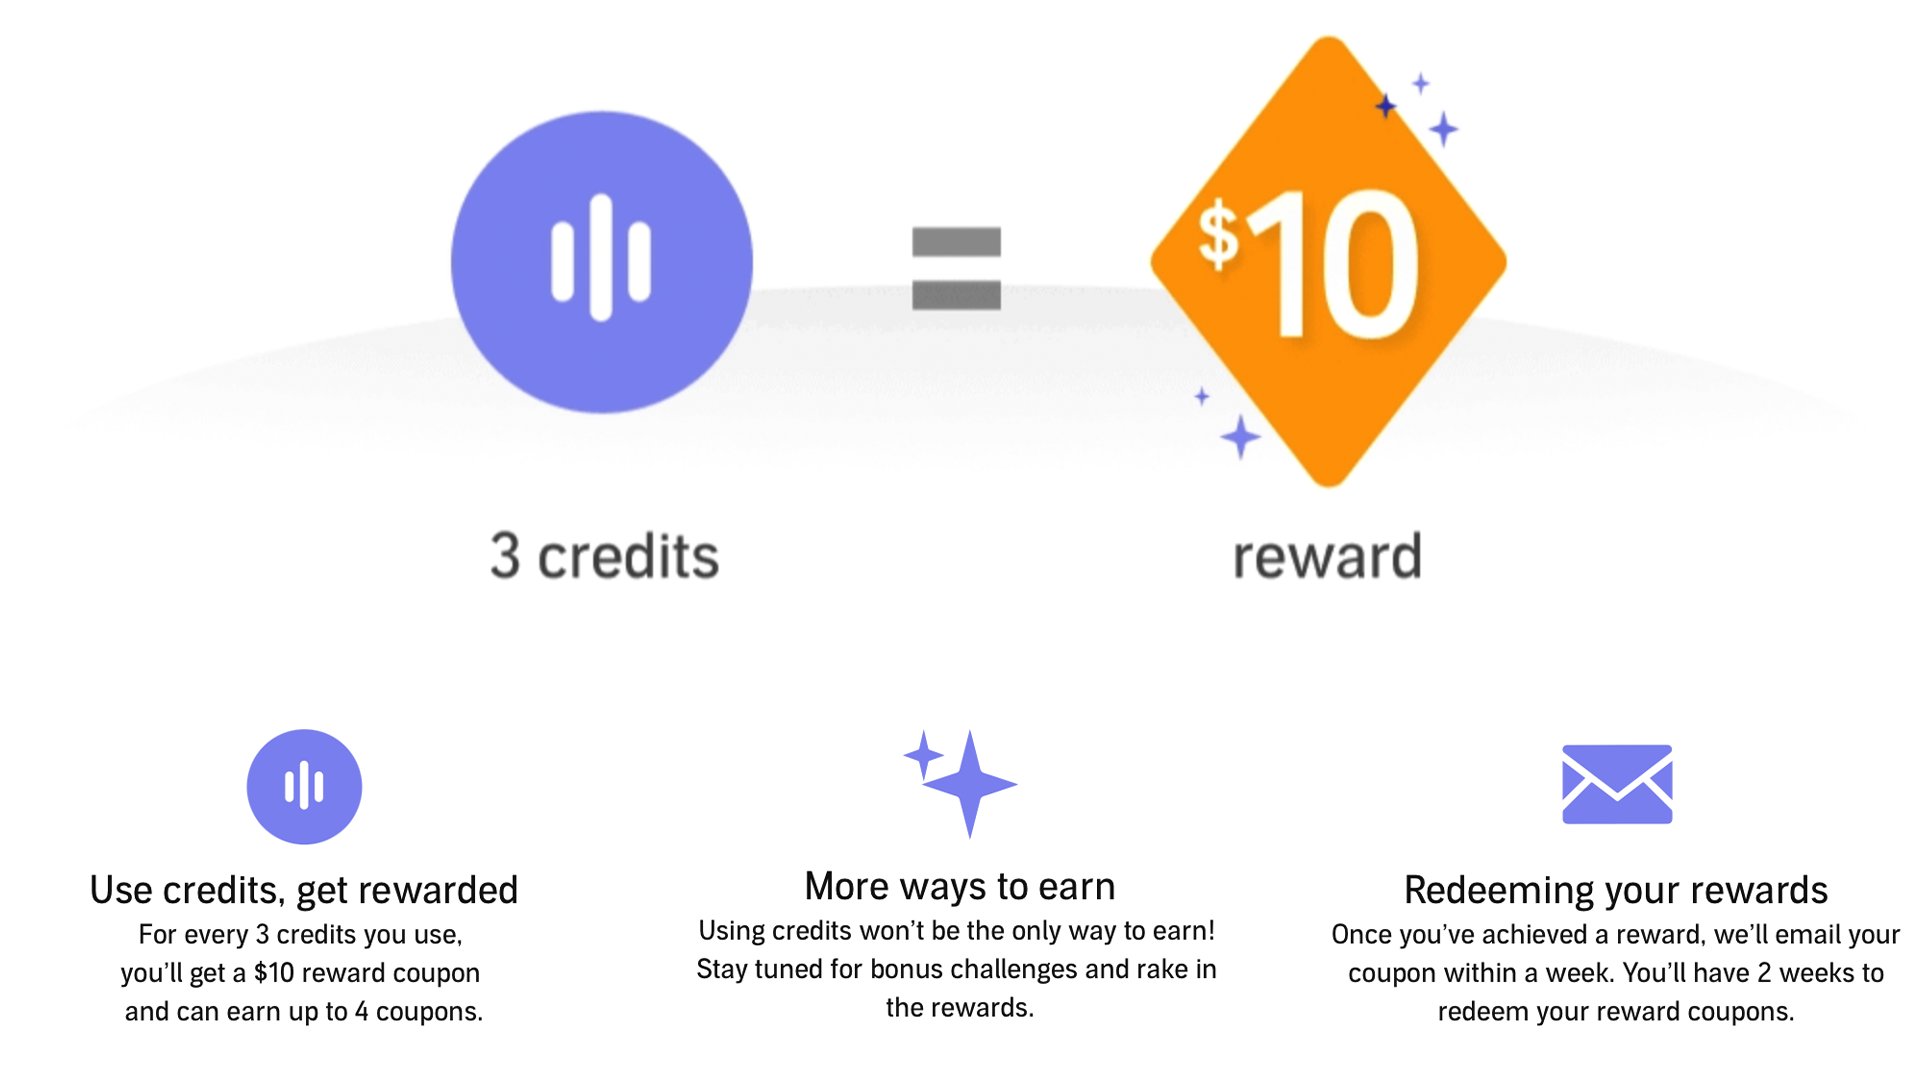 A banner stating that you can earn $10 in rewards after spending 3 credits.